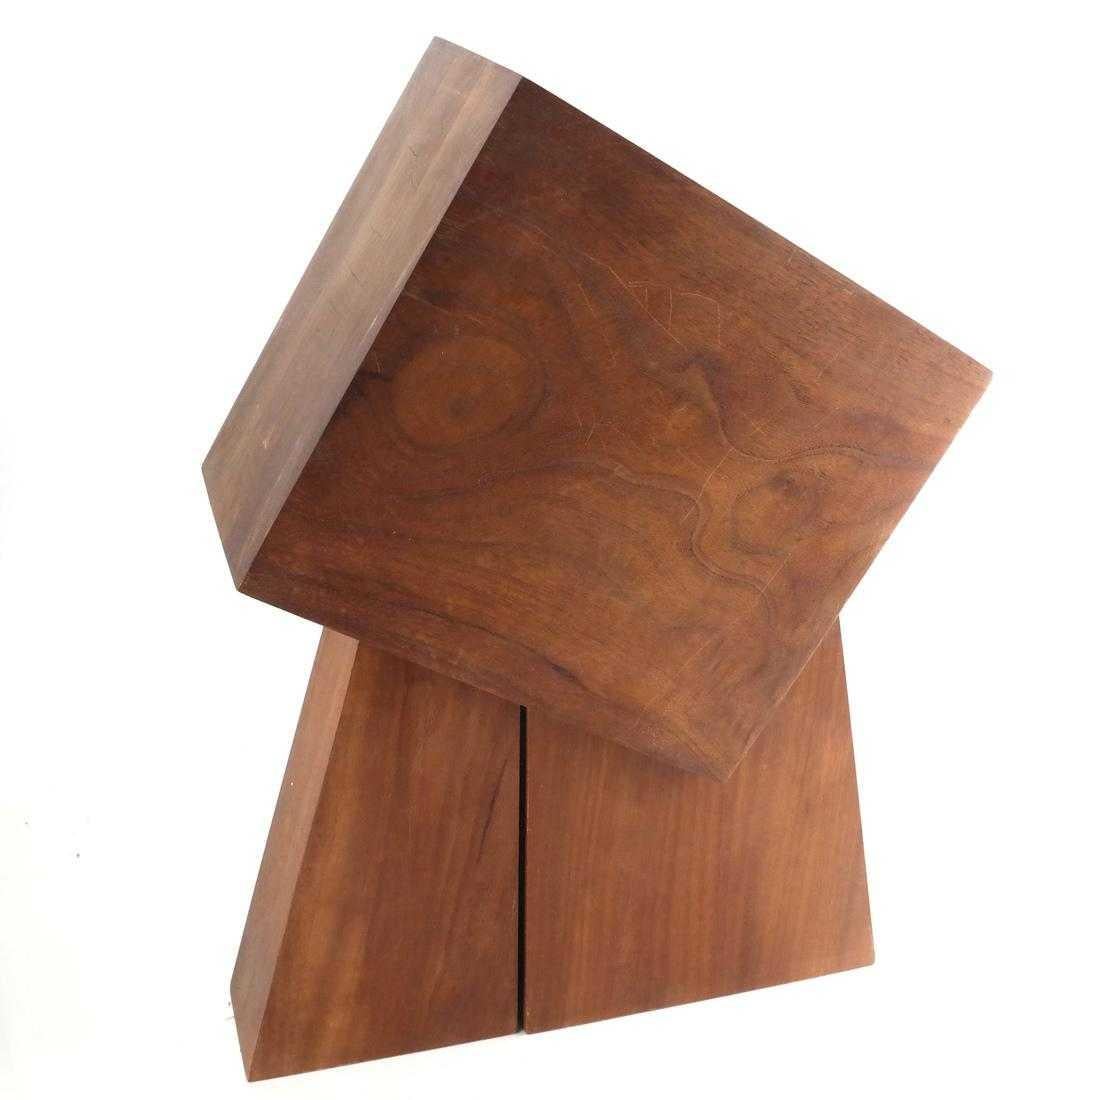 David Slivka Abstract Sculpture - Composition of 3